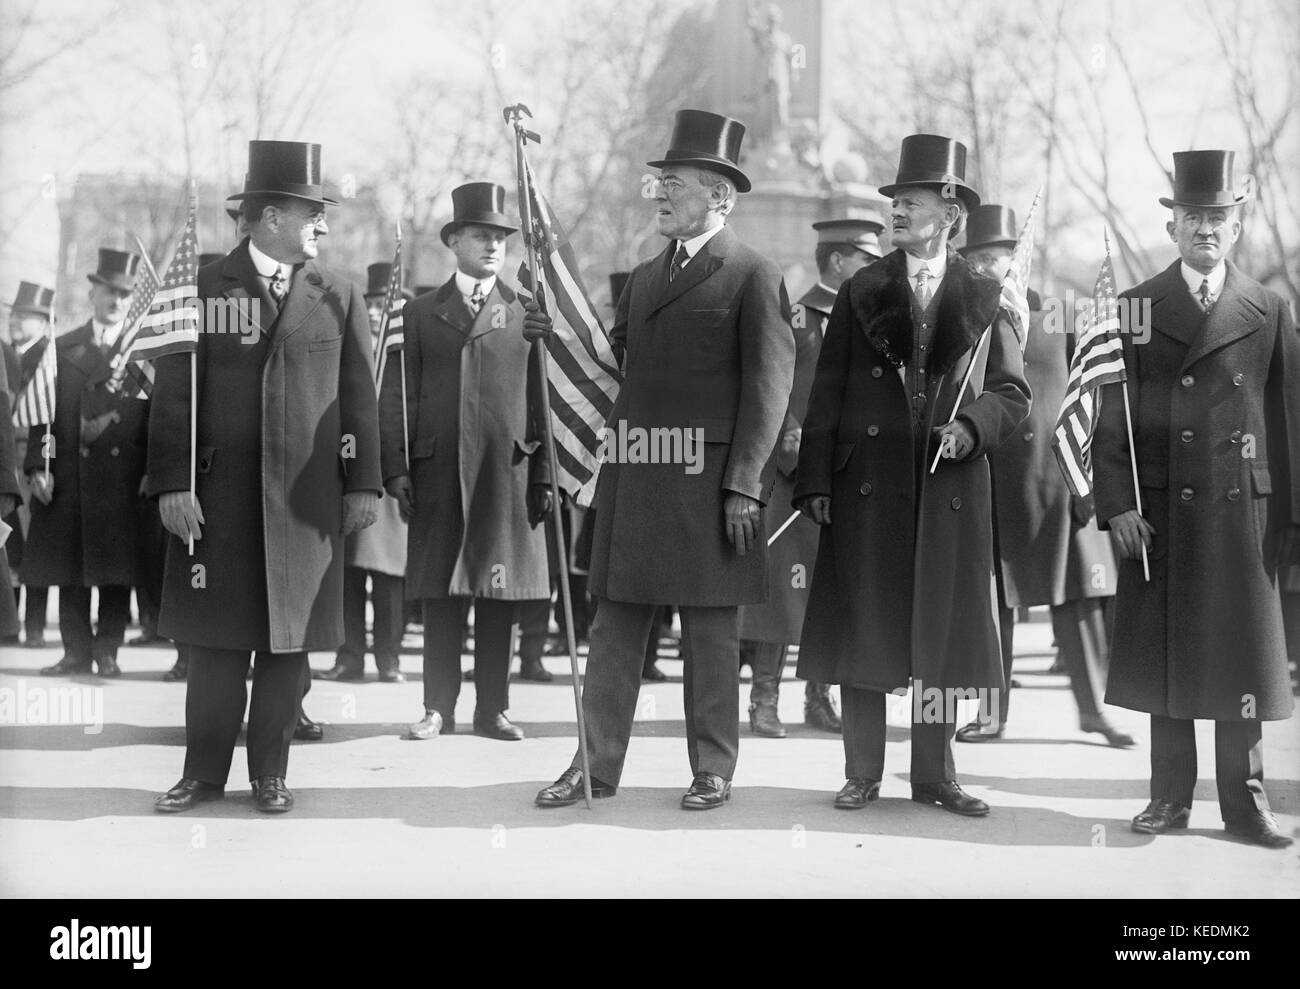 President Woodrow Wilson (center),Vice President Thomas Marshall to Wilson's left,Holding American Flags during Parade Honoring Wilson's Return from Paris Peace Conference,Washington DC,USA,Harris & Ewing,March 1919 Stock Photo